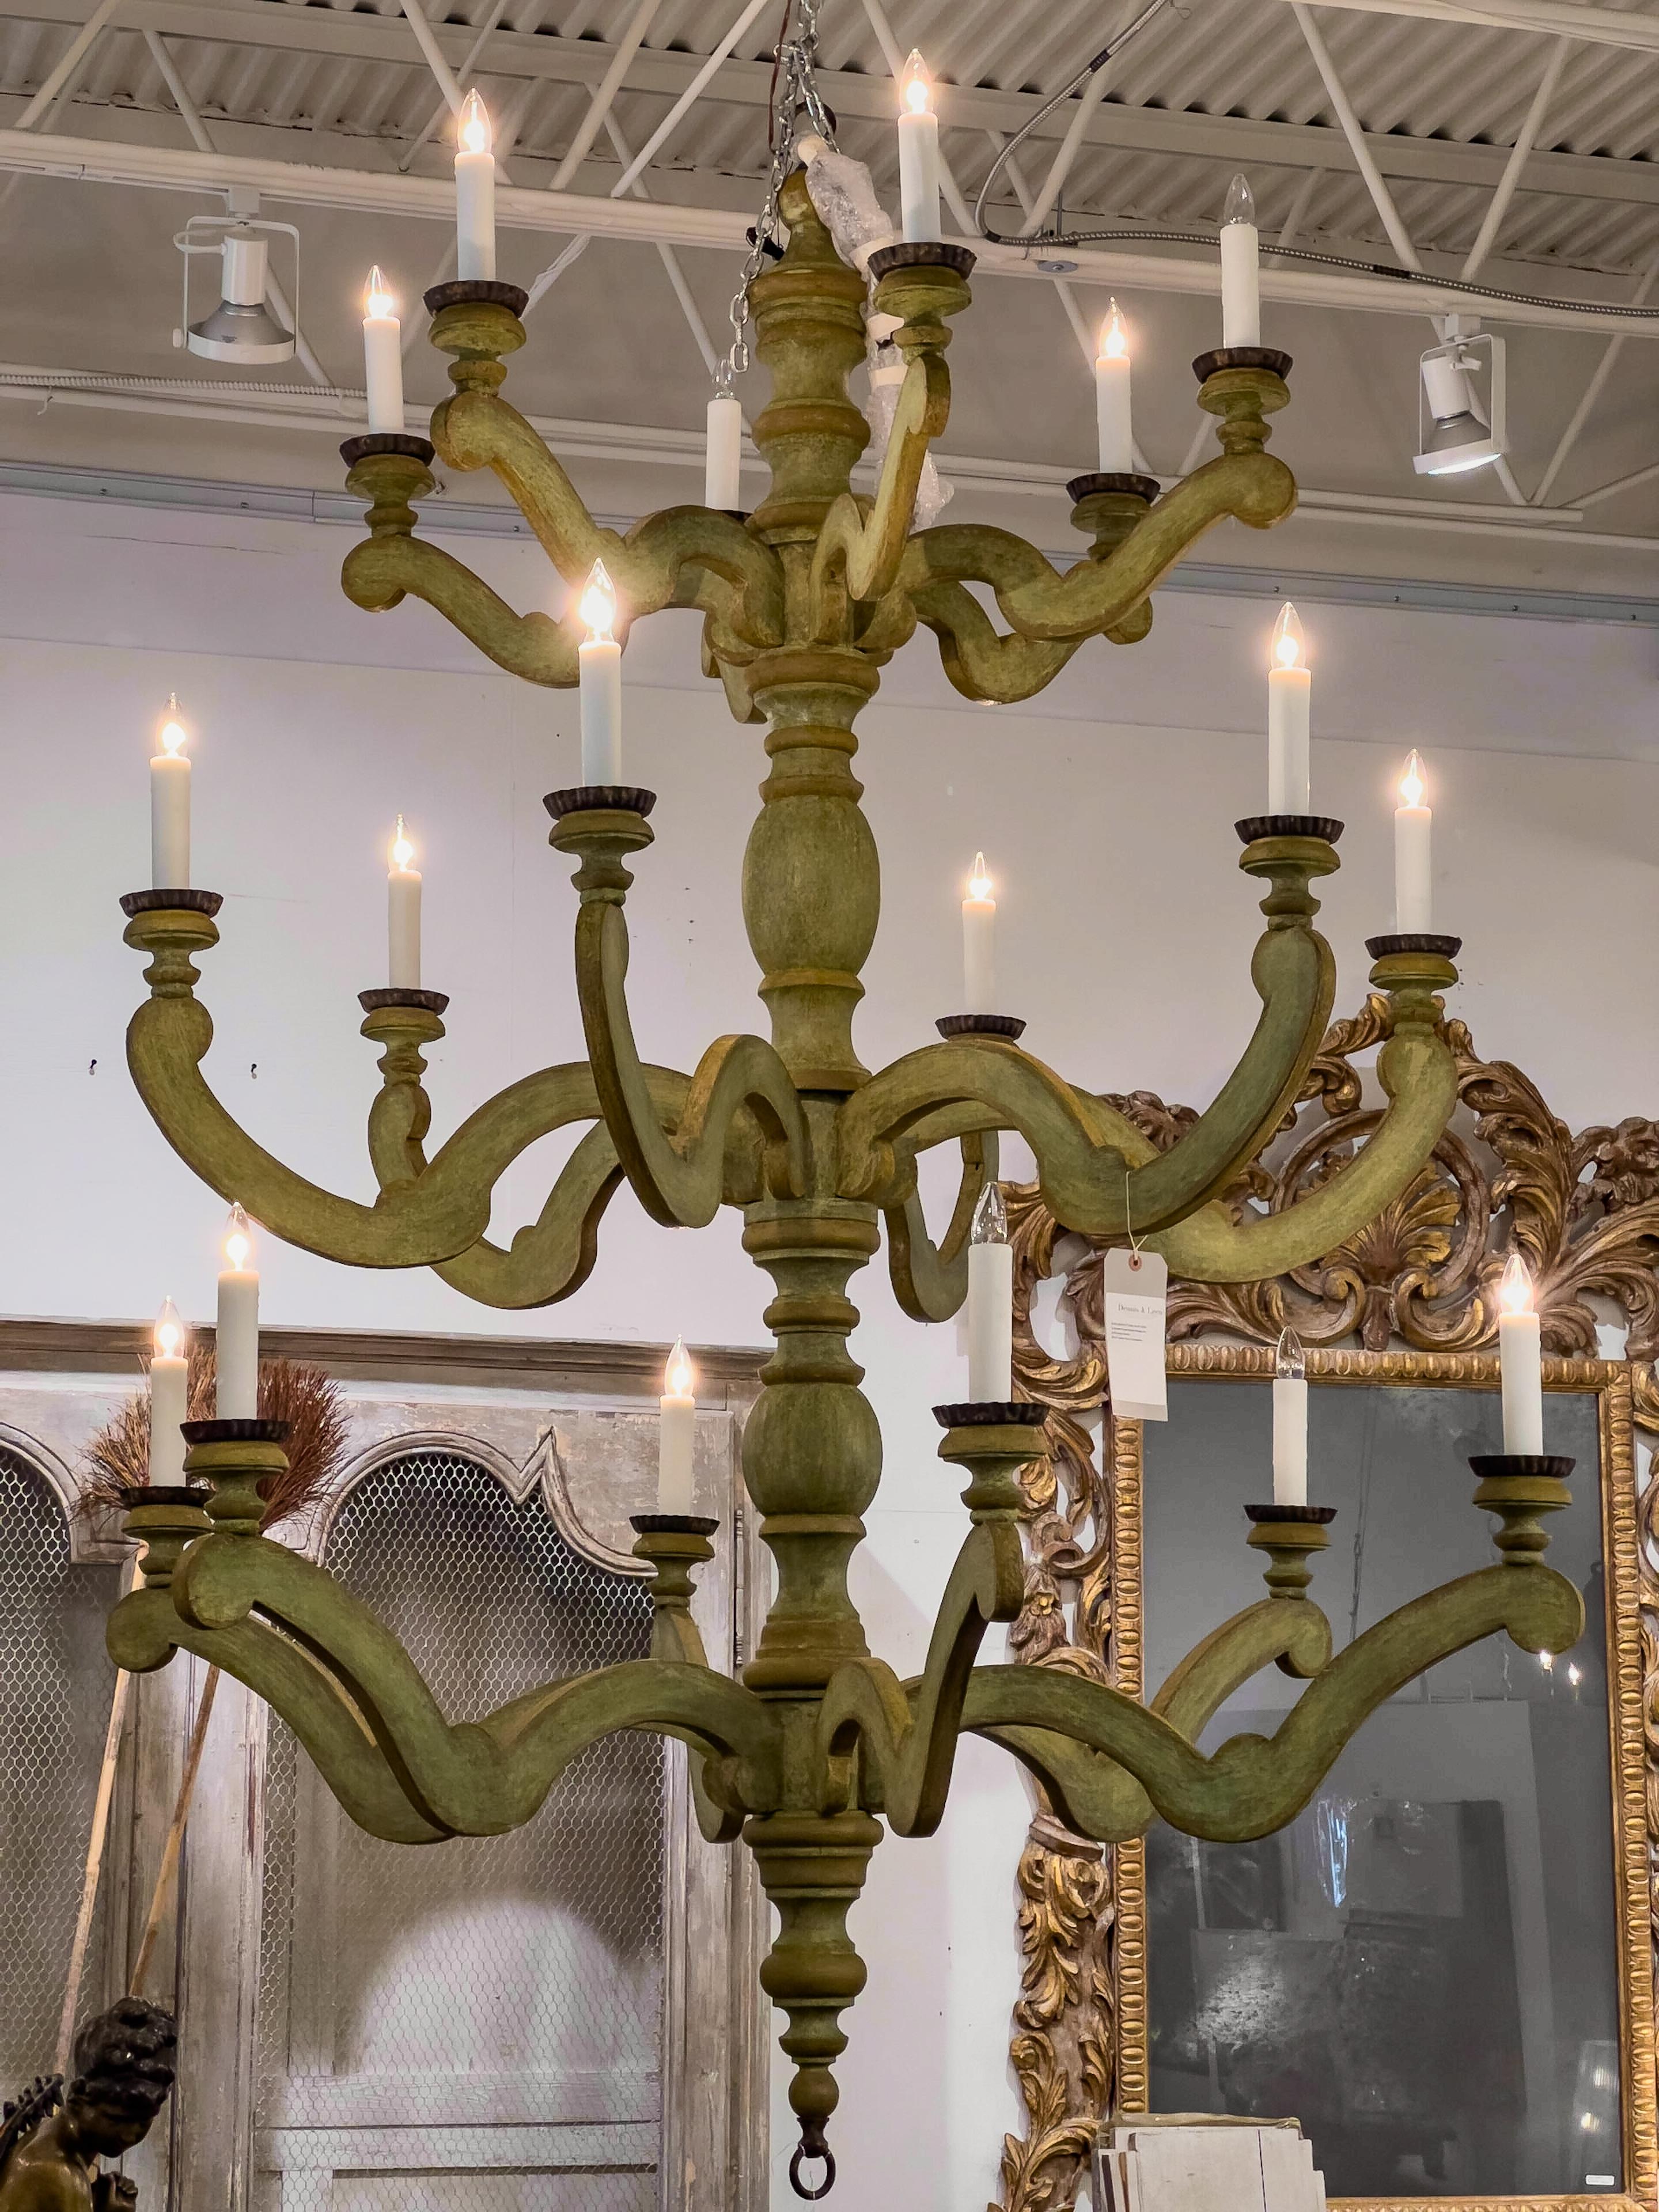 Grand Country French style custom 3-tier Wooden Chandelier with 18 lights, a turned central column, and shaped arms.

Chandelier for an amazing large location! For someone who wants to make a grand statement! 

All new construction by Dennis & Leen.